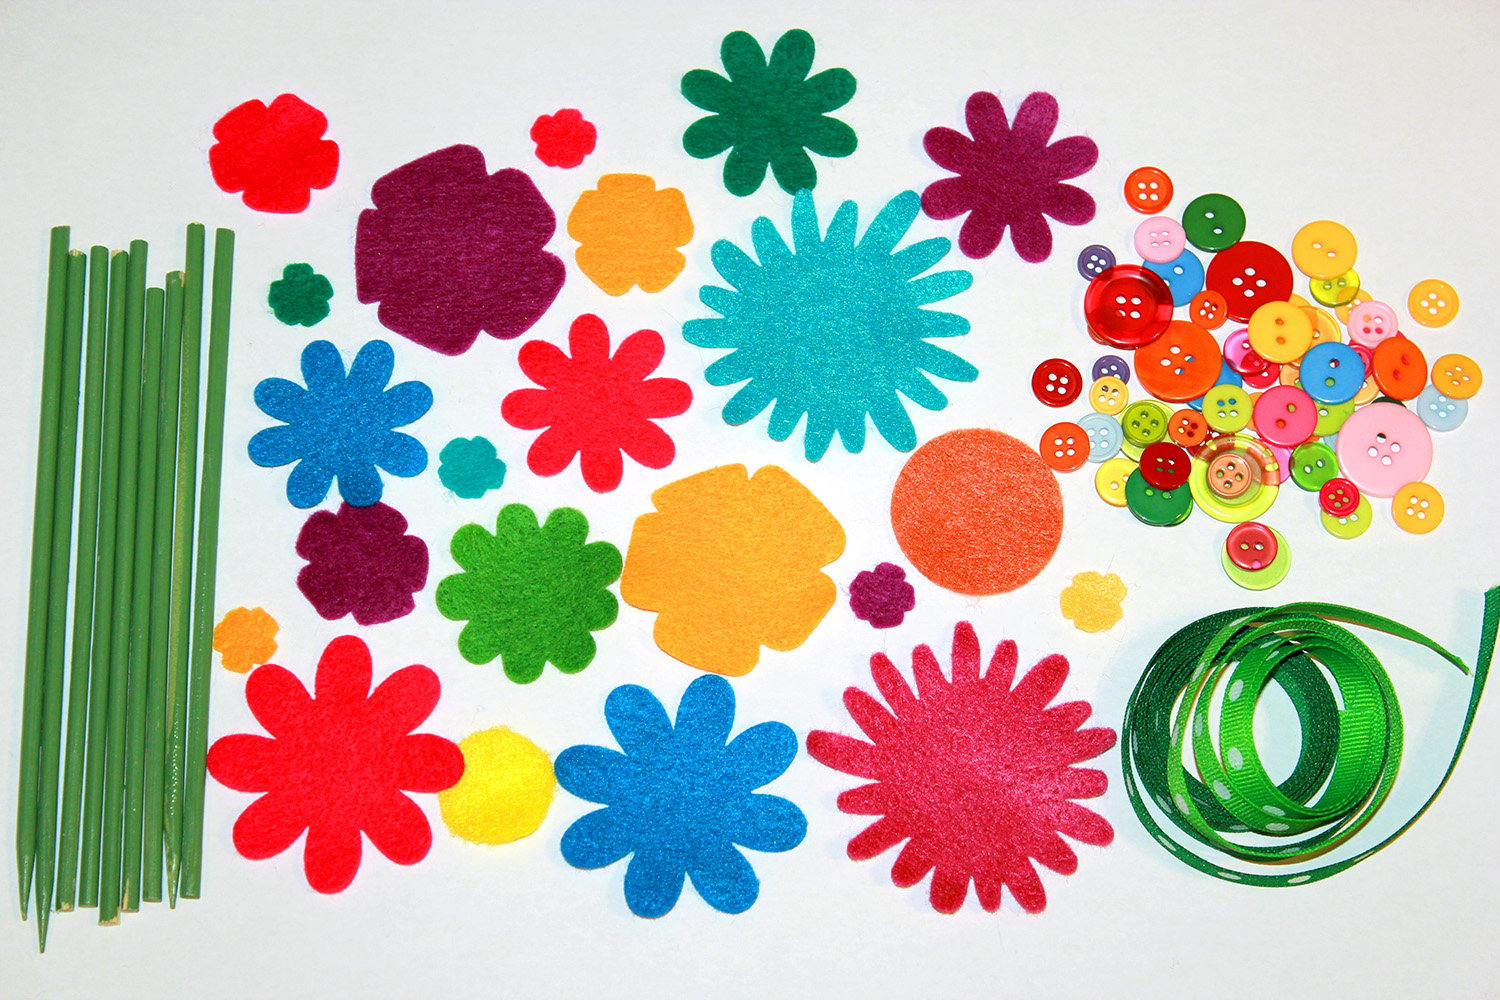 cut out flower shapes from felt